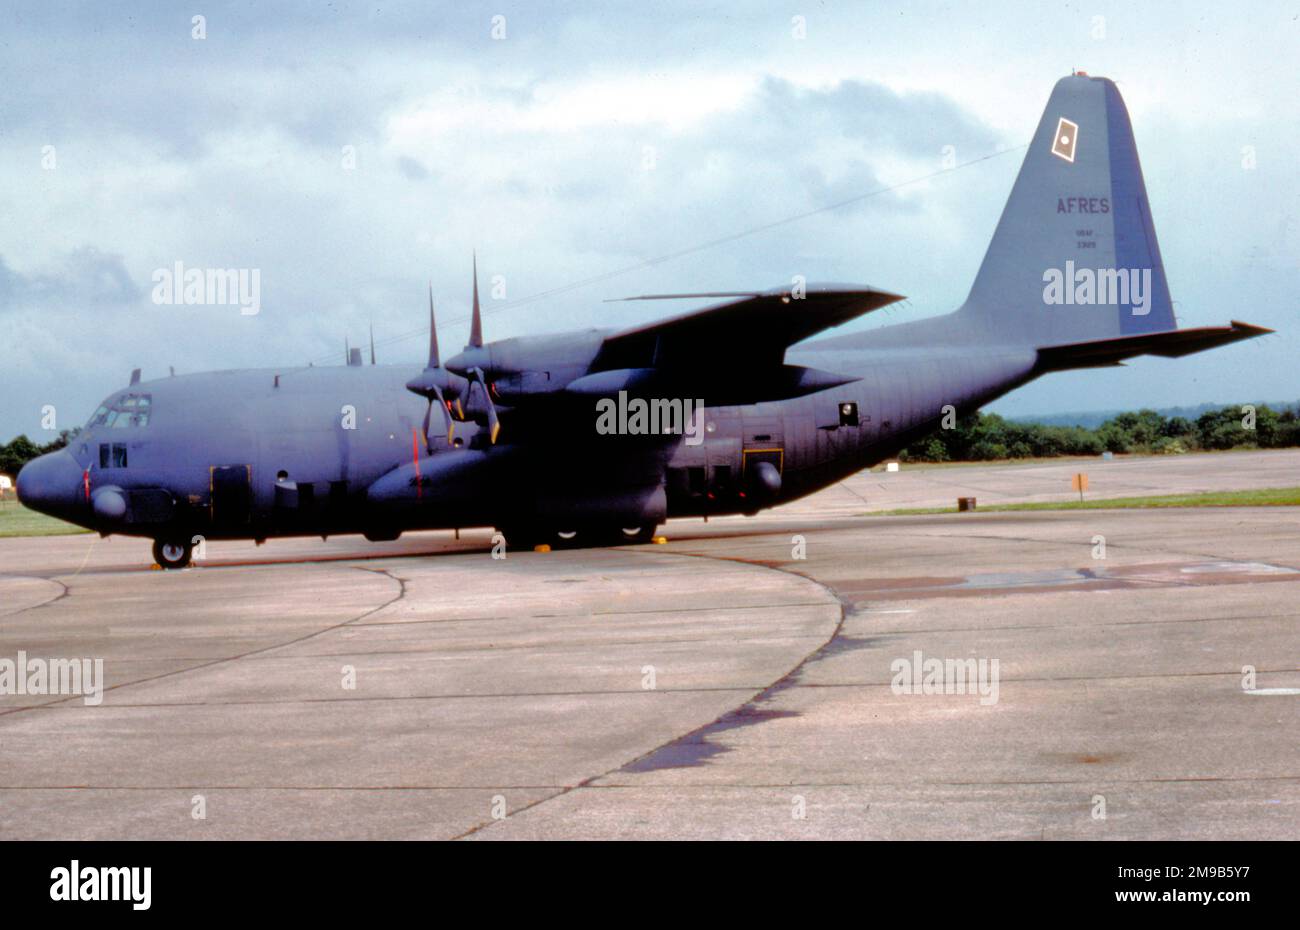 United States Air Force (USAF) - Lockheed AC-130A-LM Hercules 53-3129 (msn 182-3001), of the 711th Special Operations Squadron, 919th Special Operations Wing (Air Force Reserve), Duke Field, FL. (The first production C-130, rolled out on 10 March 1955. Subsequently modified as a JC-130A, then to an AC-130A gunship). Stock Photo